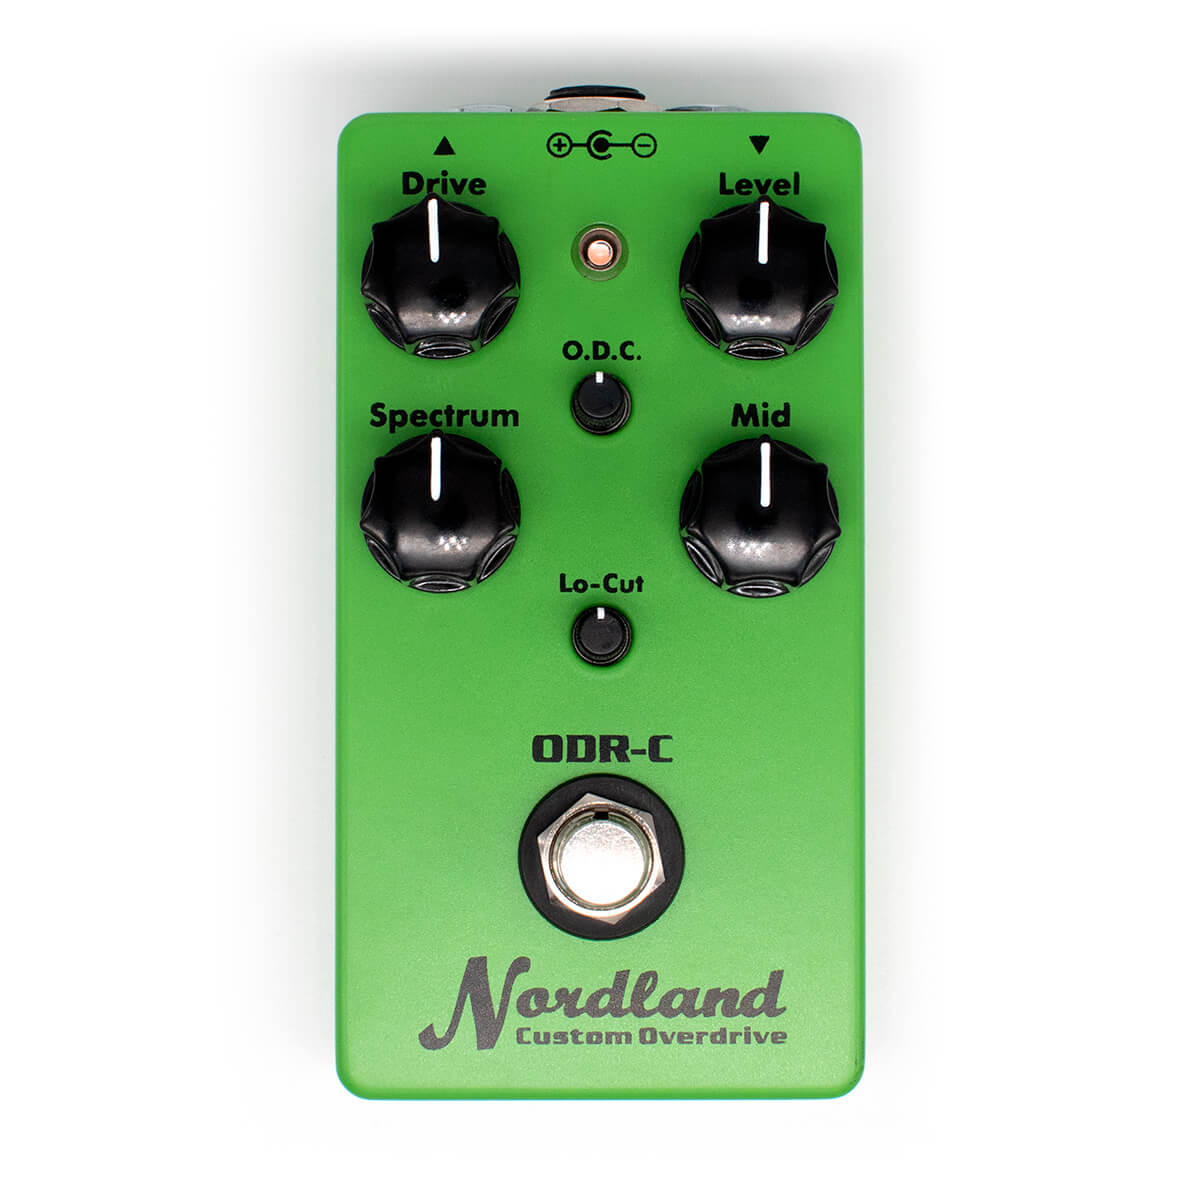 Tracing Journal: Nordland ODR-C Custom Overdrive - Aion FX